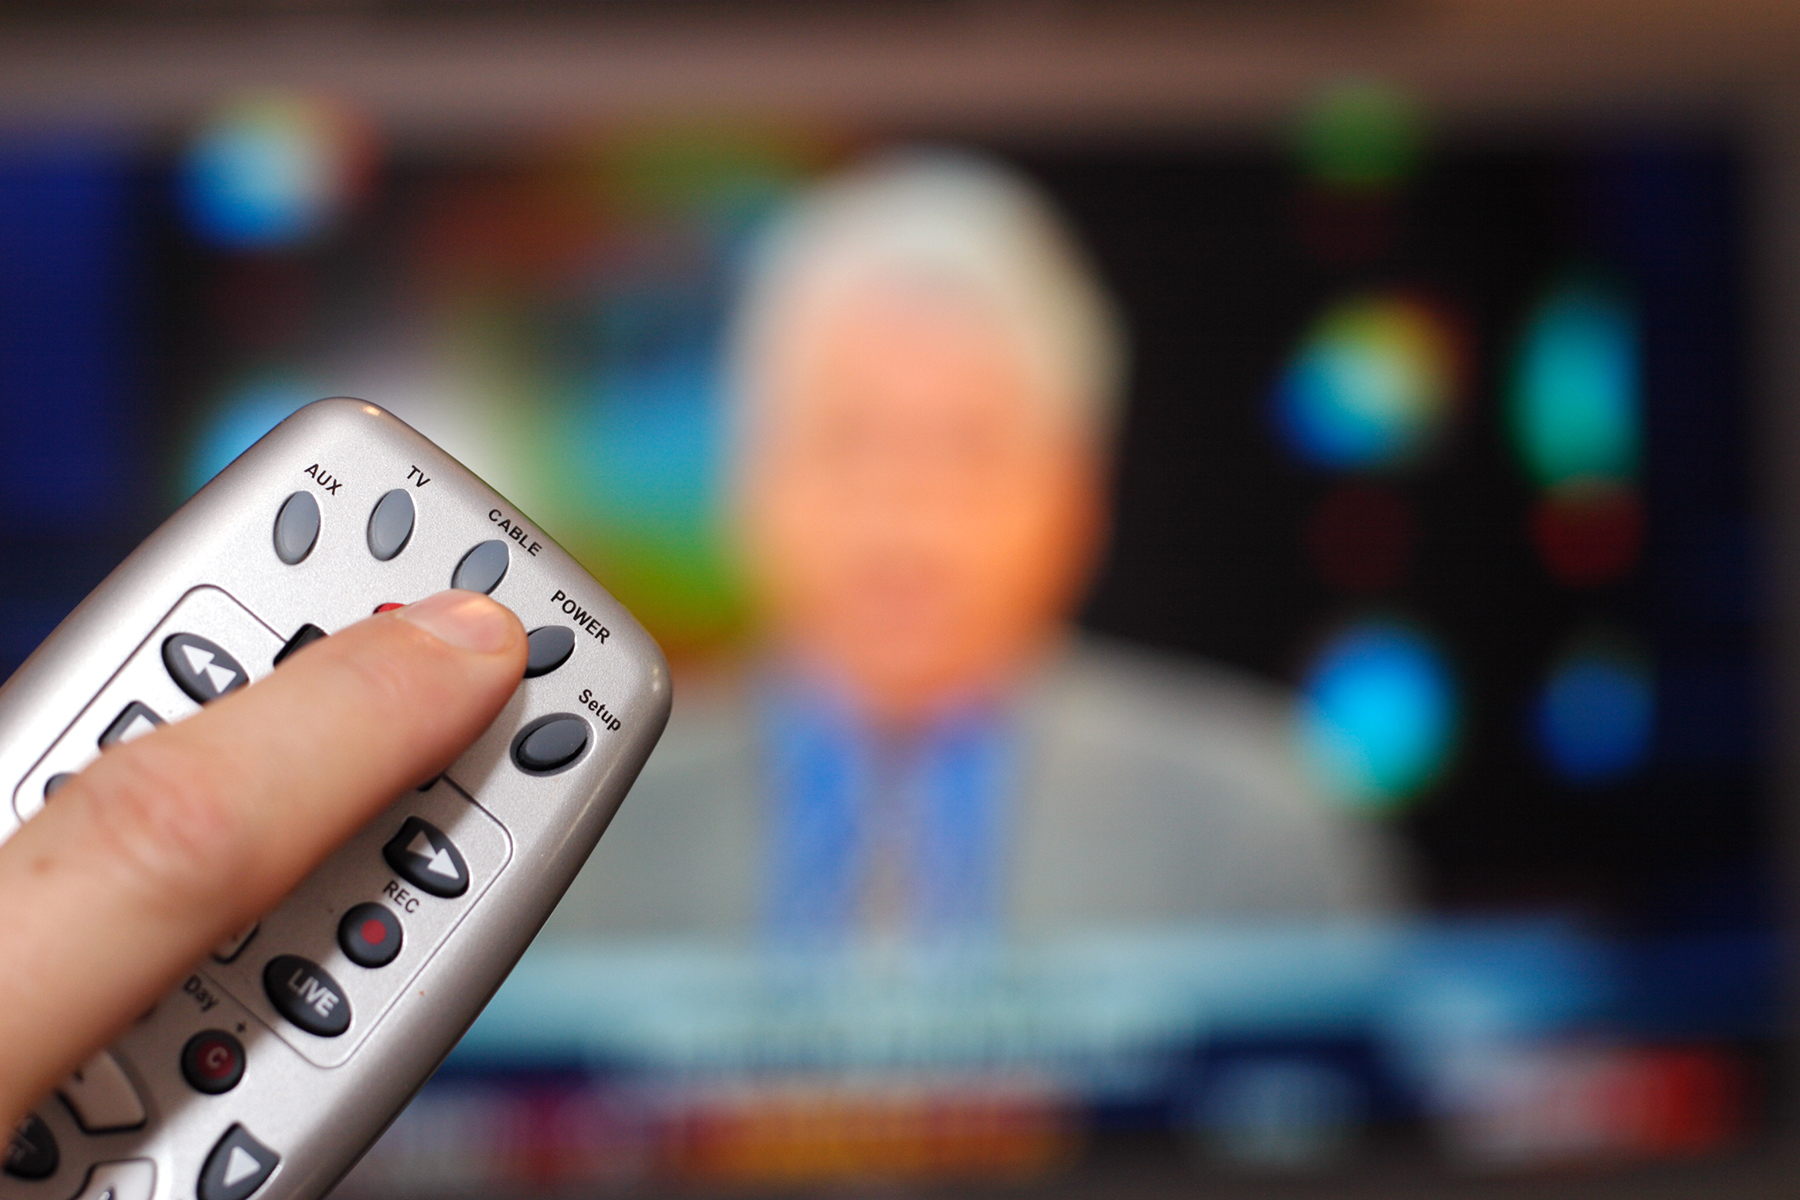 Remote switches off the tv news